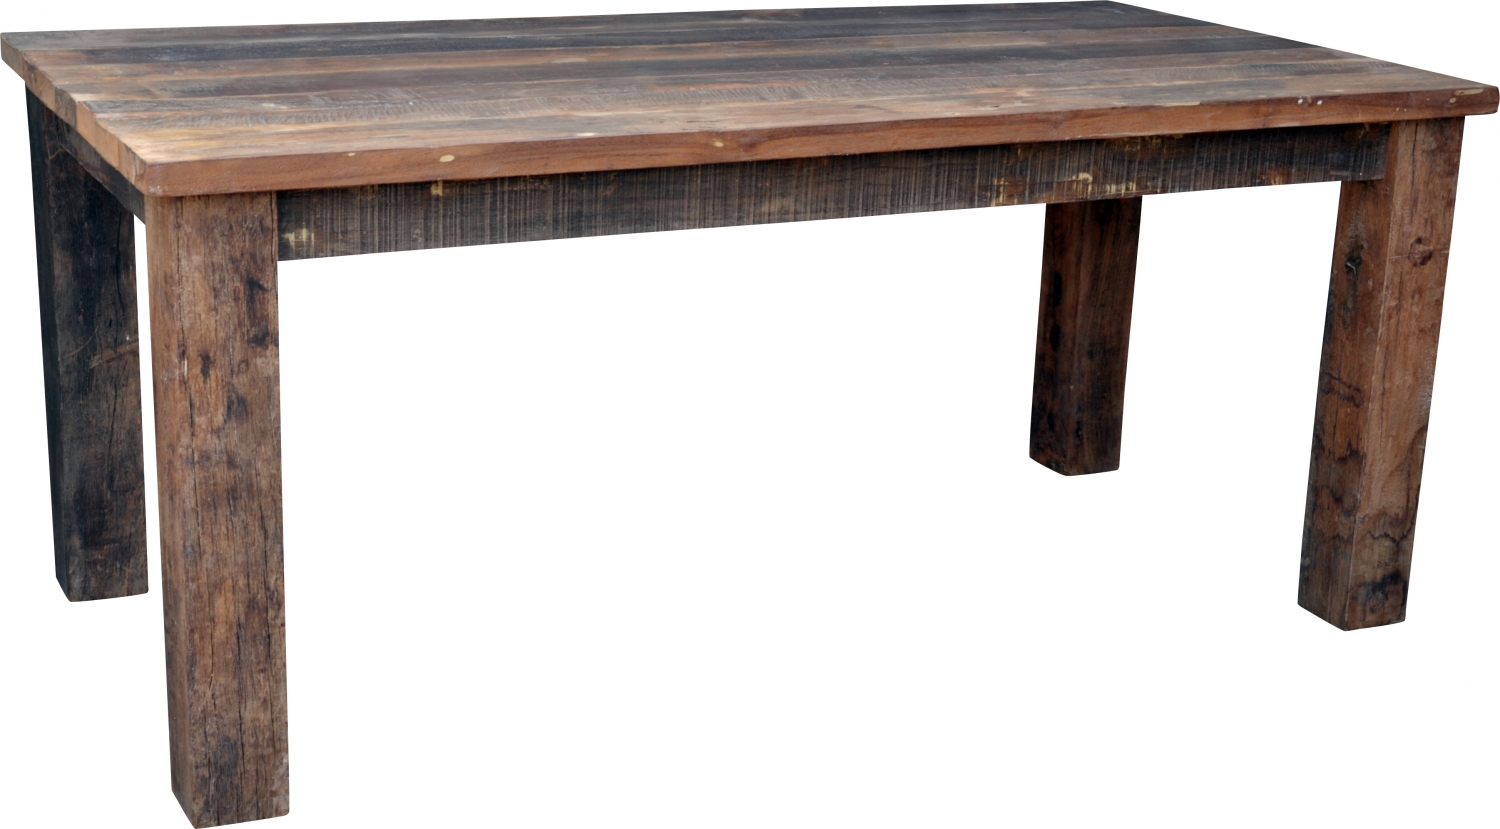 Dining Table Made Of Rustic Wooden Planks Jh3 181 180x90x77 Cm